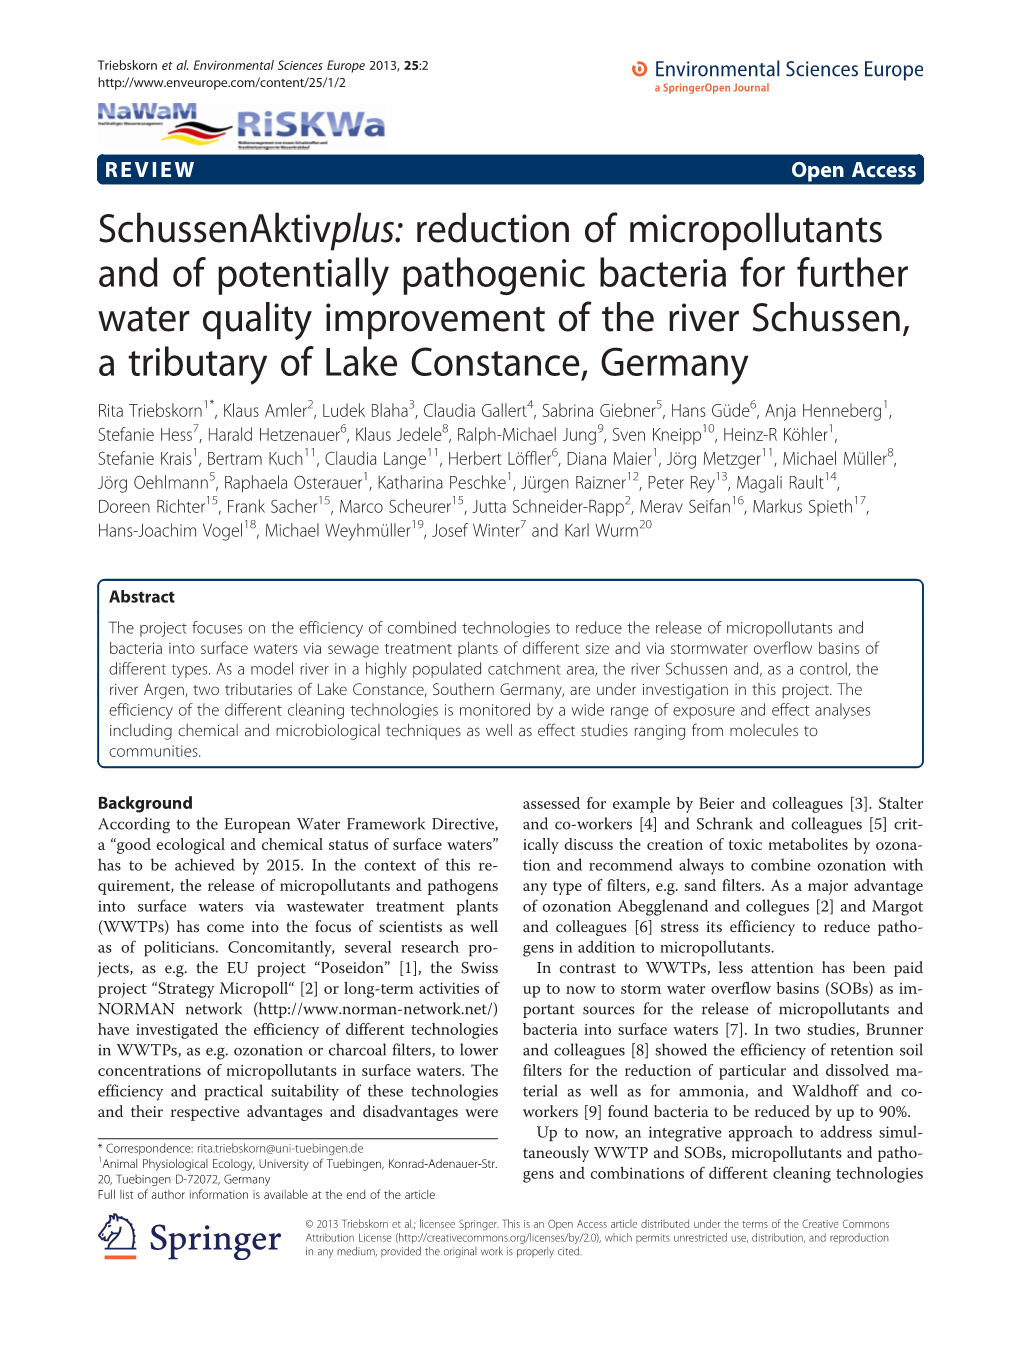 Schussenaktivplus: Reduction of Micropollutants and of Potentially Pathogenic Bacteria for Further Water Quality Improvement Of